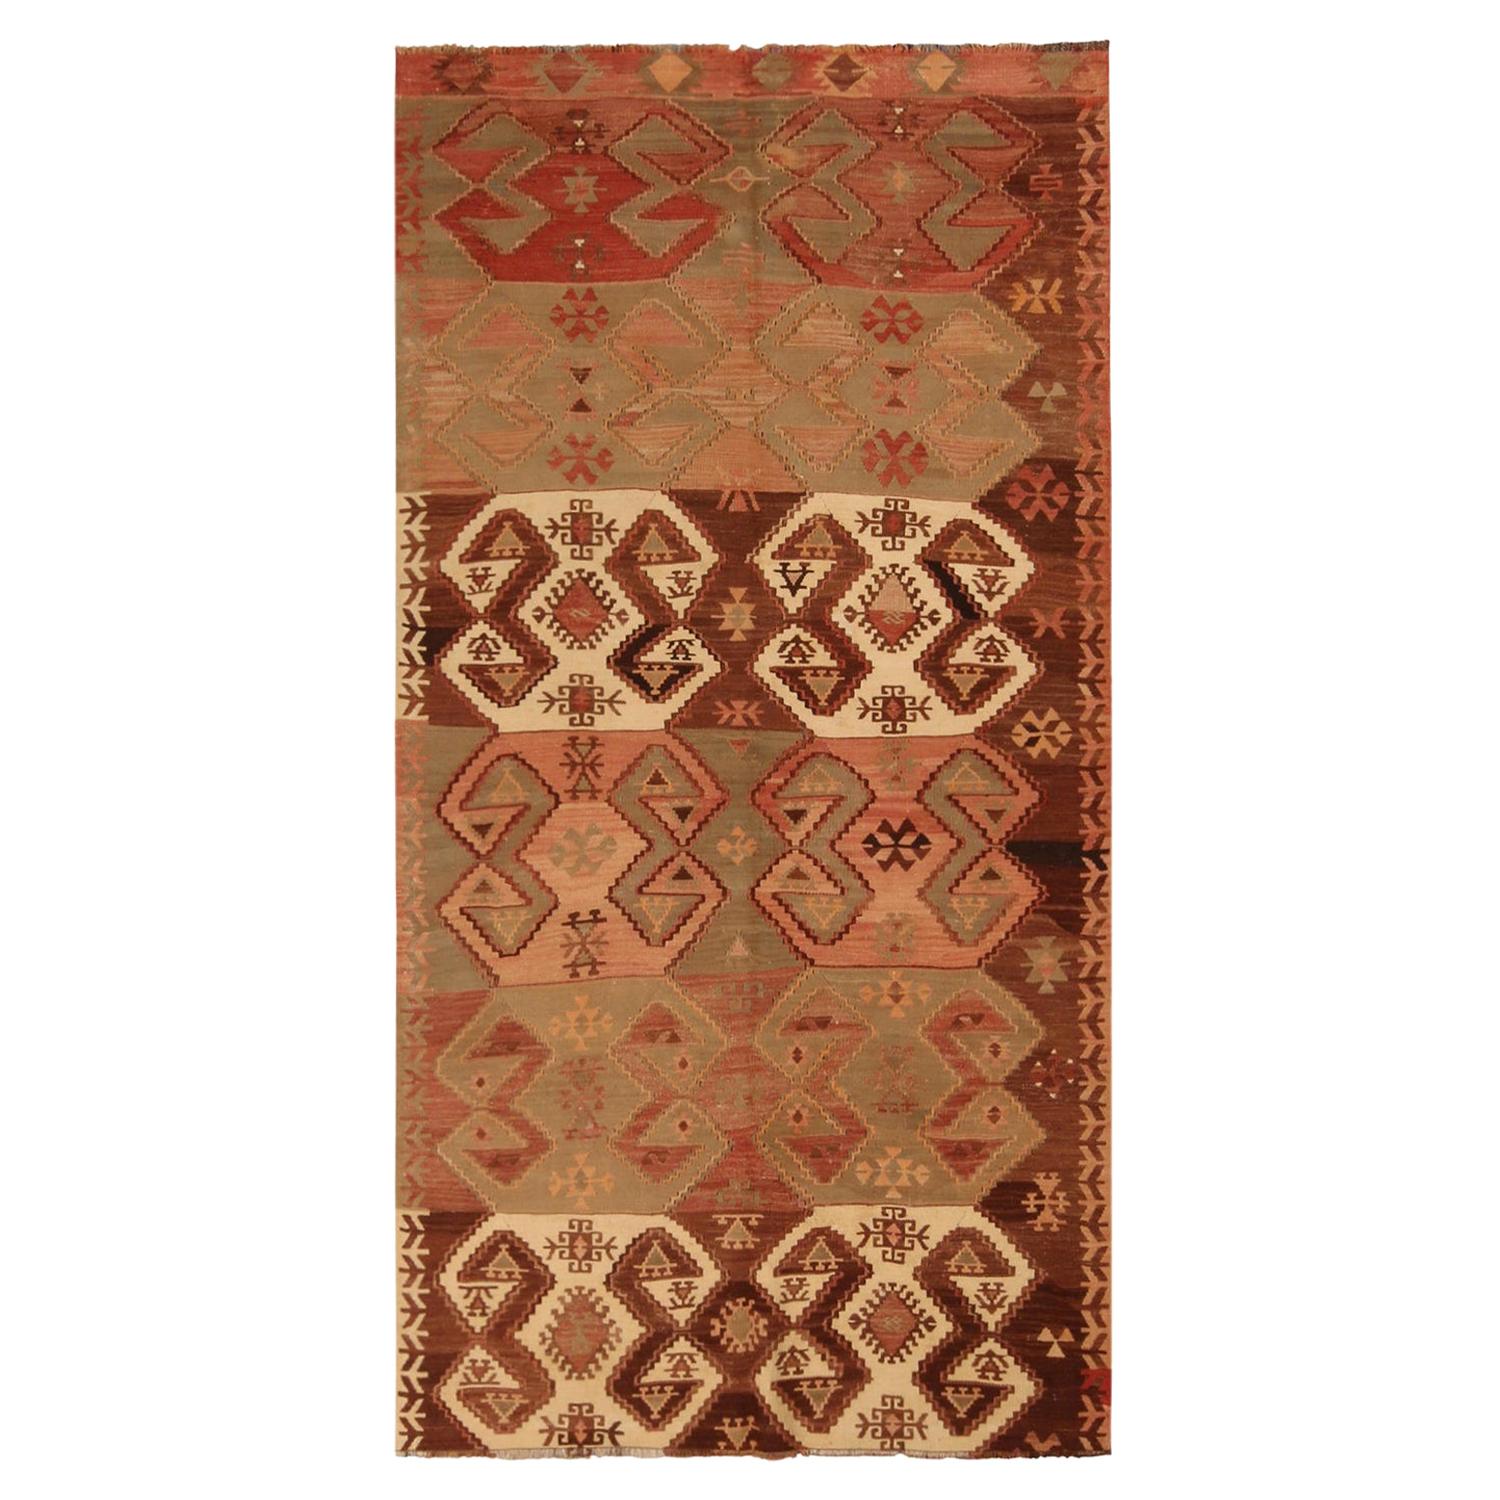 Vintage Emirdag Red and Brown Wool Kilim Rug with White Accents by Rug & Kilim